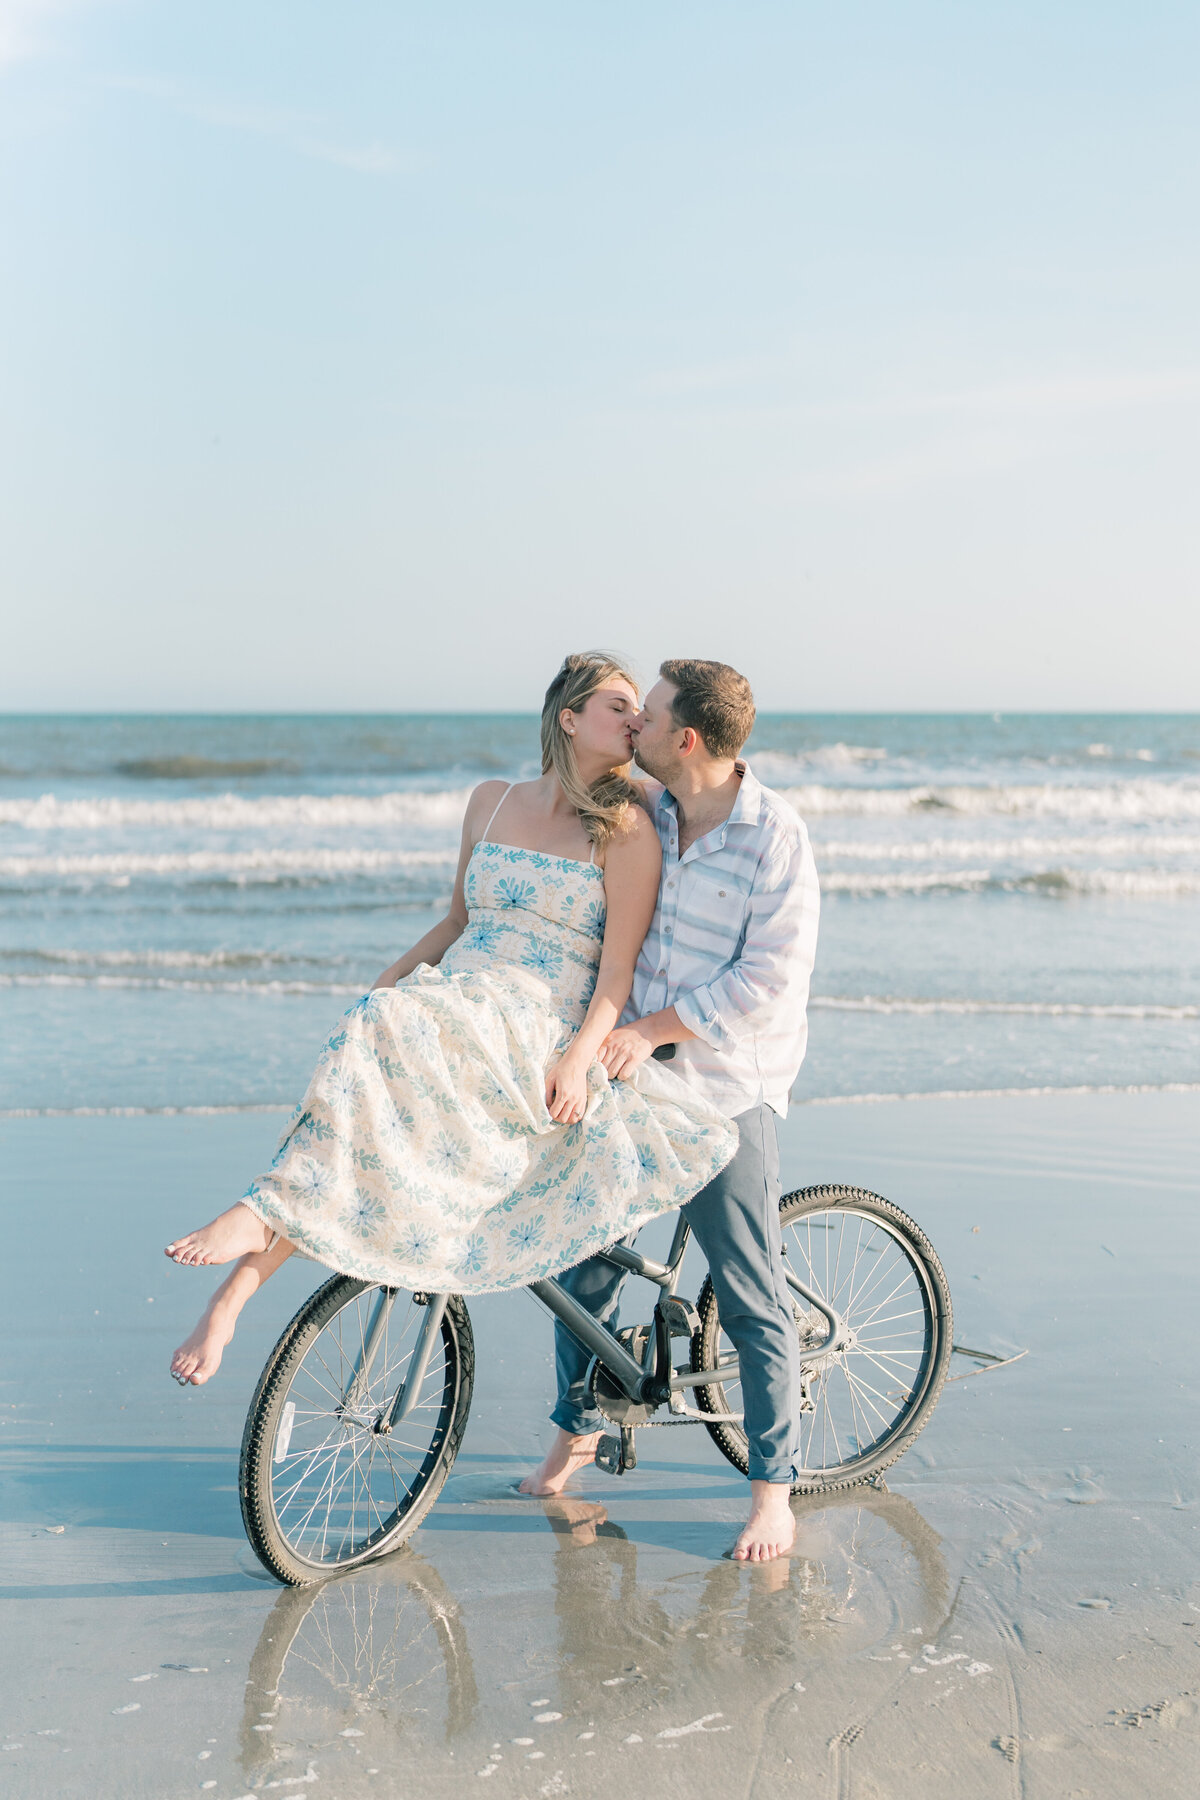 Engagement session on the beach with girl riding on guys handle bars. Fun engagement photos on Kiawah Beach. Kailee DiMeglio photography.